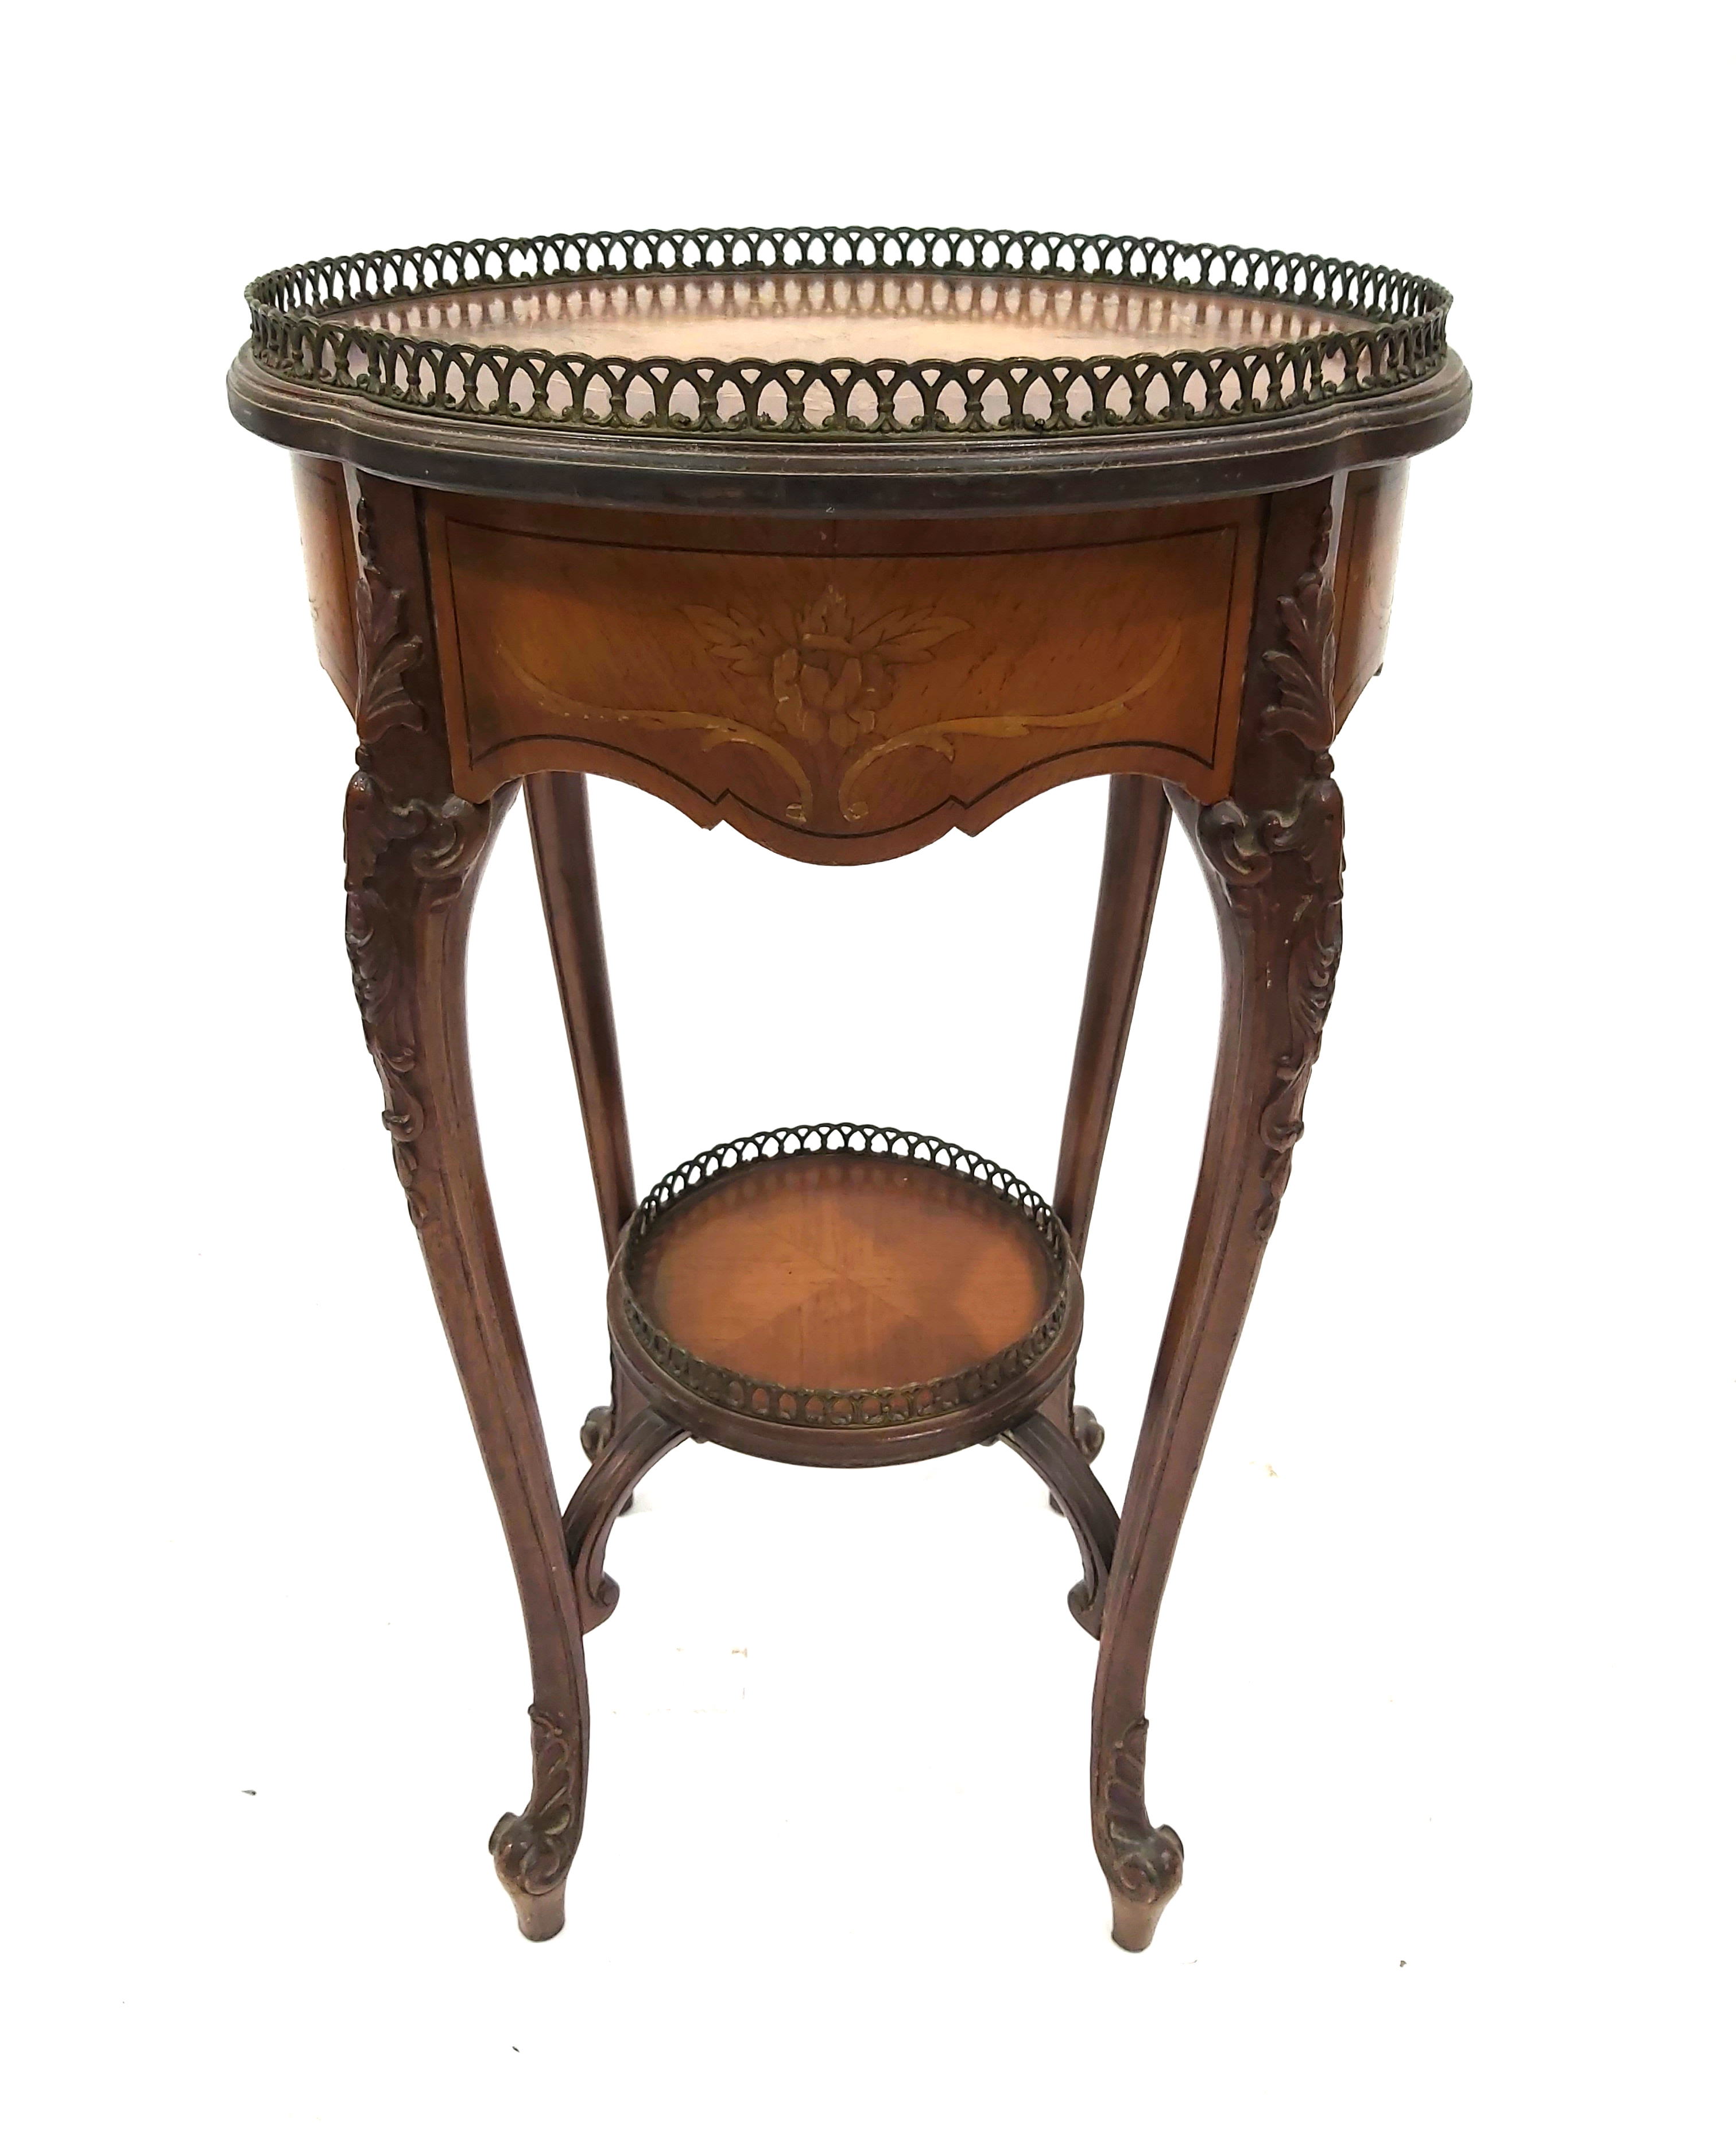 A French kingwood lamp table, early 20th Century of Louis XVI design, floral marquetry inlaid,